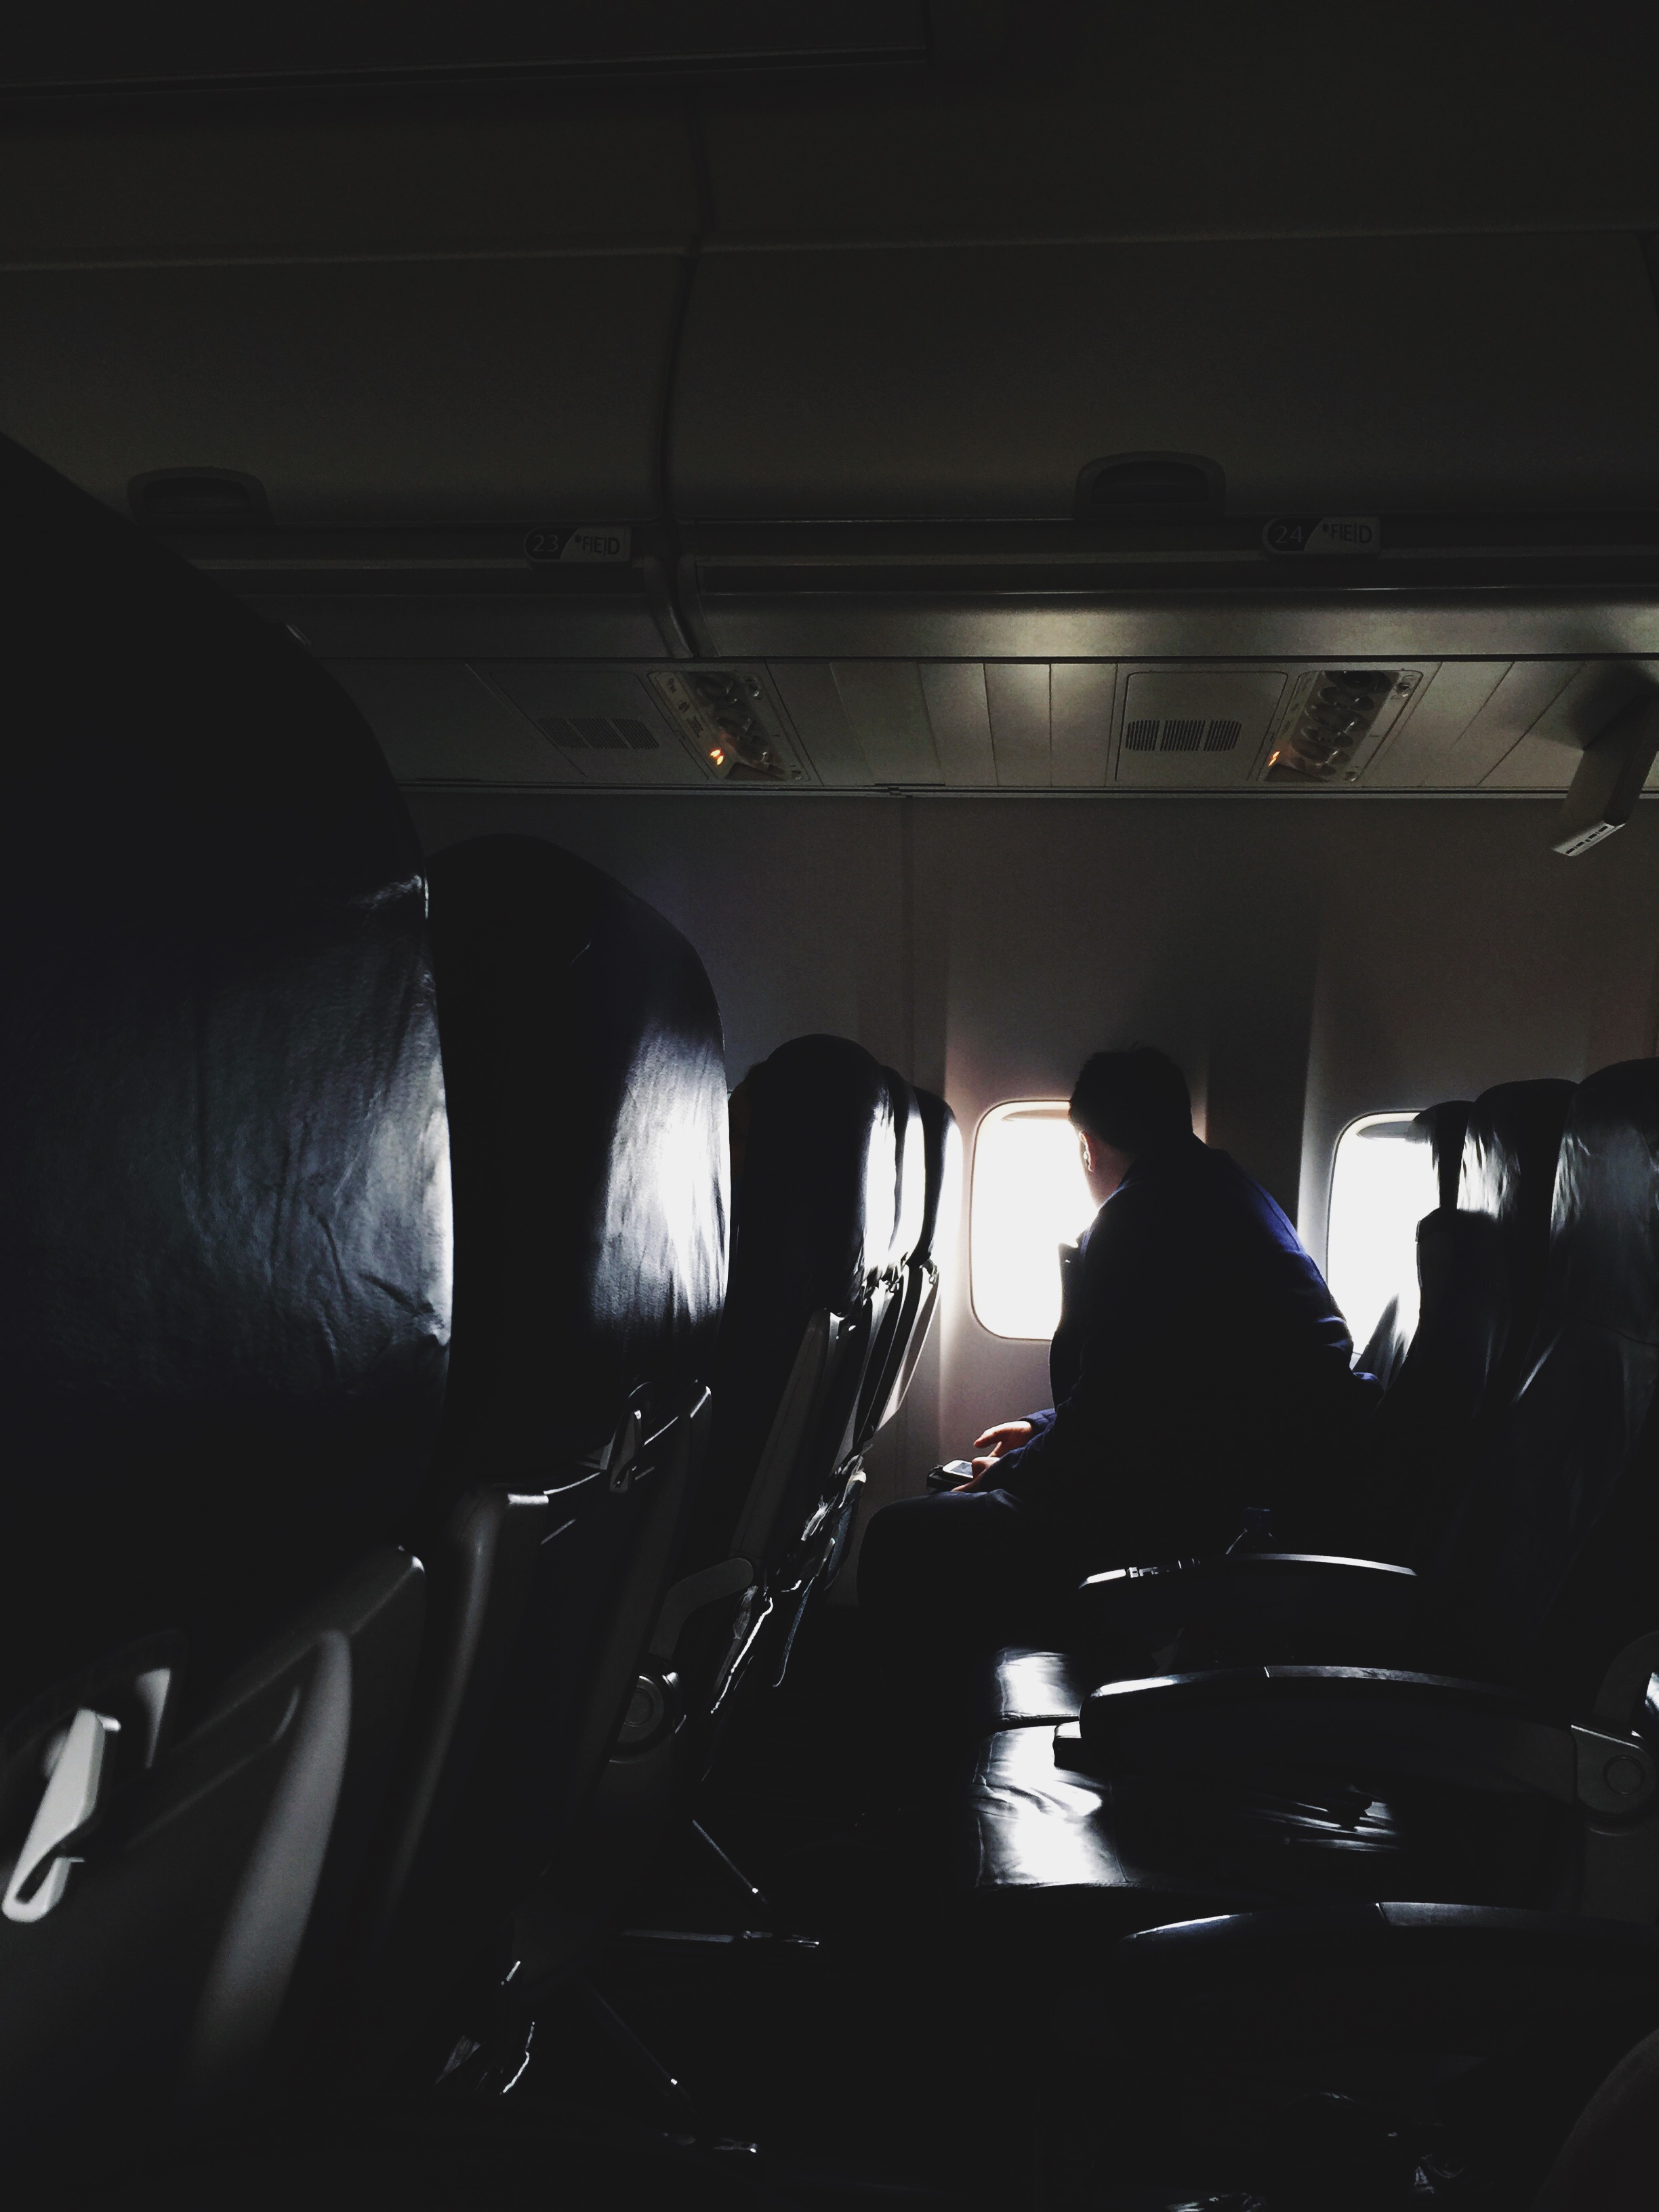   {people in airplanes.}  